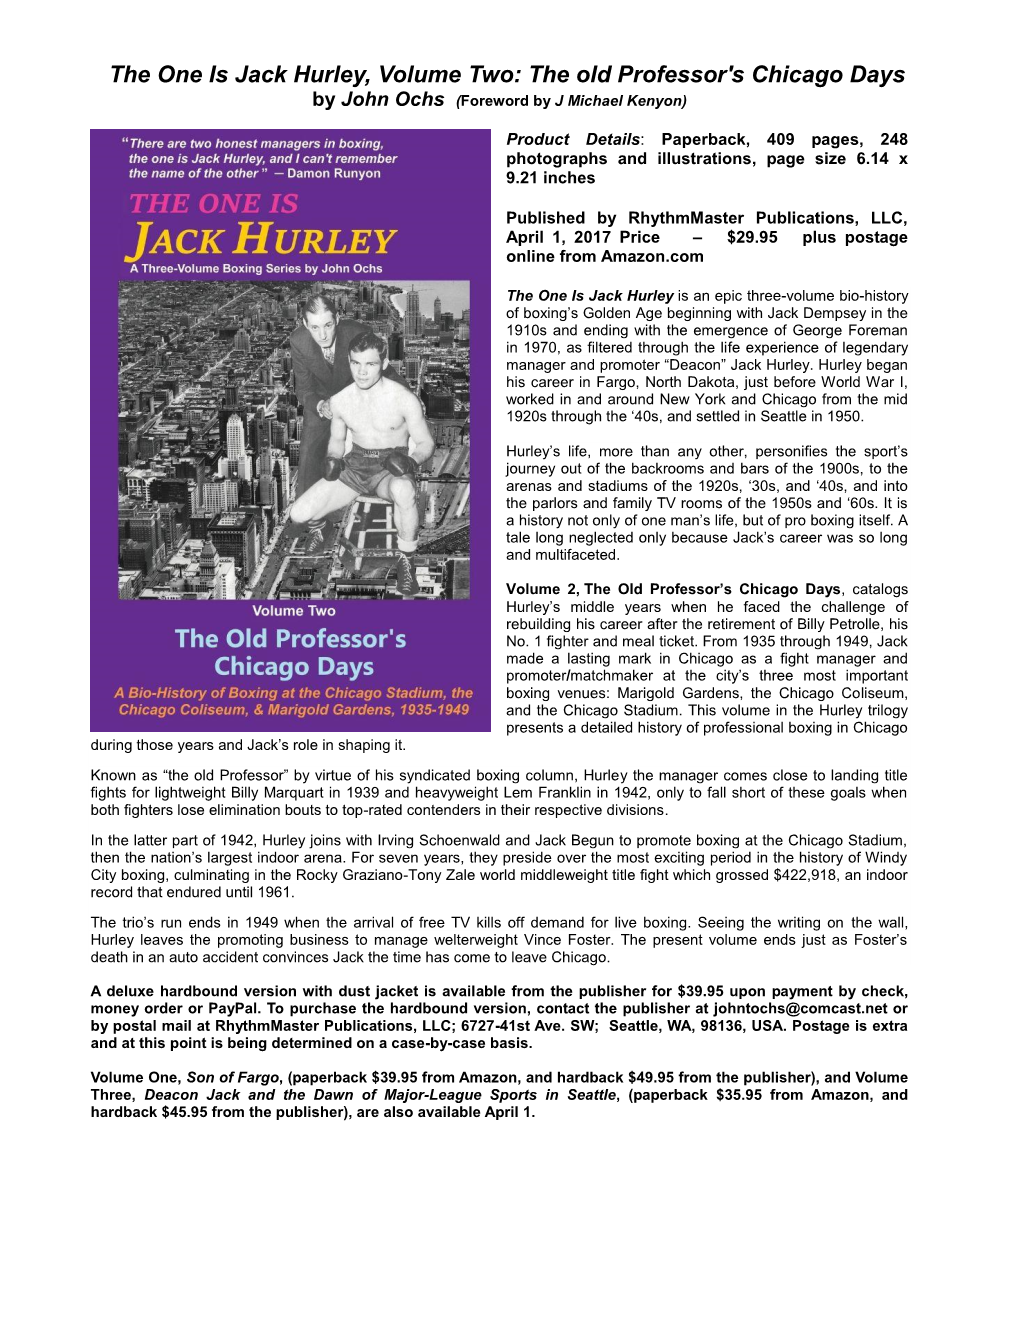 The One Is Jack Hurley, Volume Two: the Old Professor's Chicago Days by John Ochs (Foreword by J Michael Kenyon)